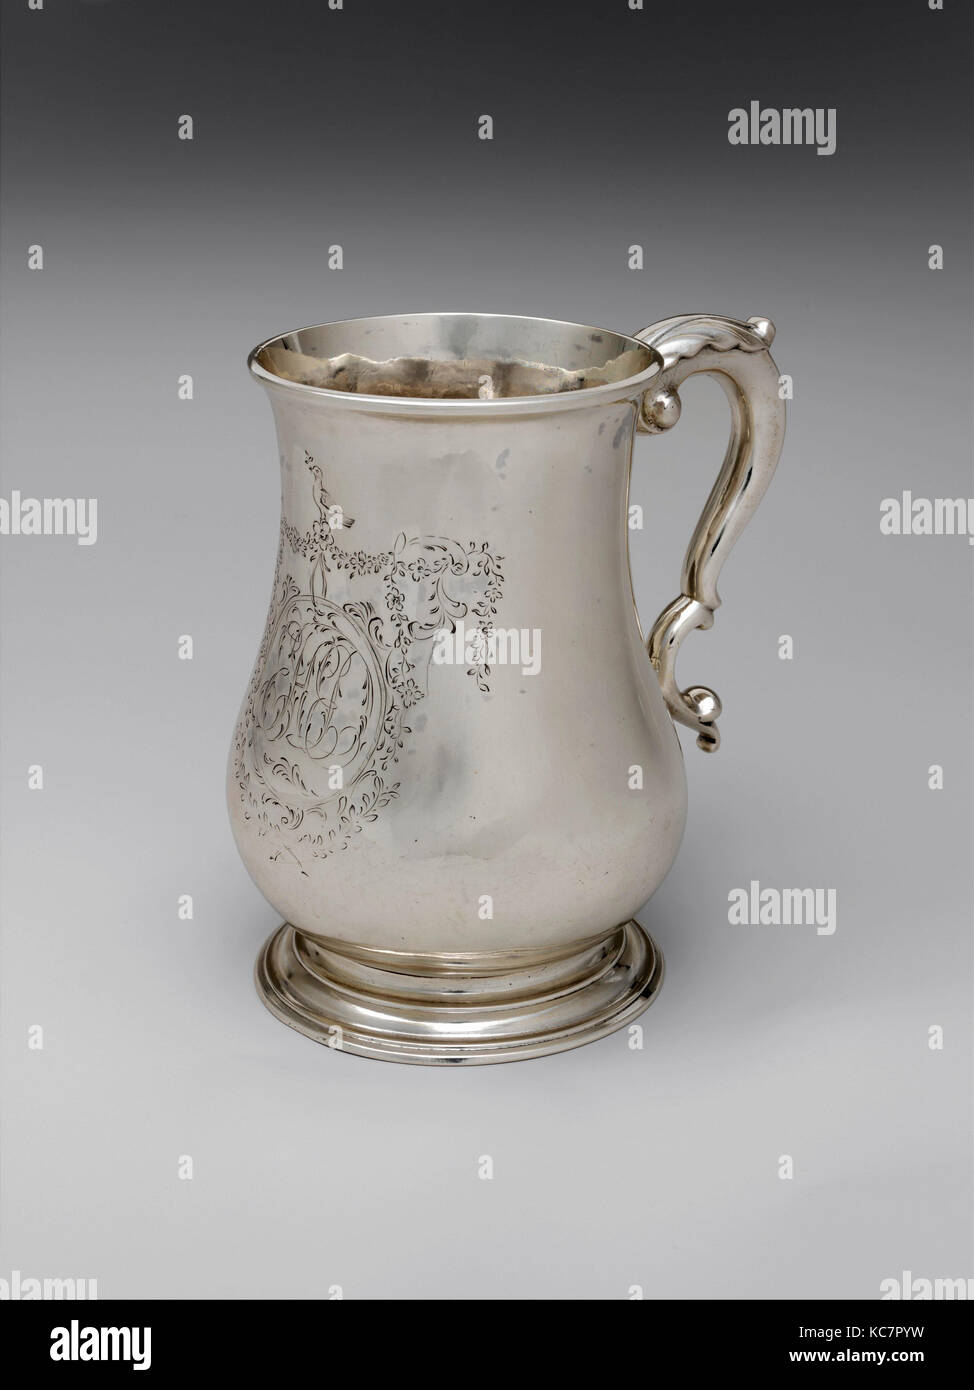 Cann, 1783, Made in Boston, Massachusetts, United States, American, Silver, Overall: 6 1/2 x 6 3/8 in. (16.5 x 16.2 cm); 22 oz Stock Photo